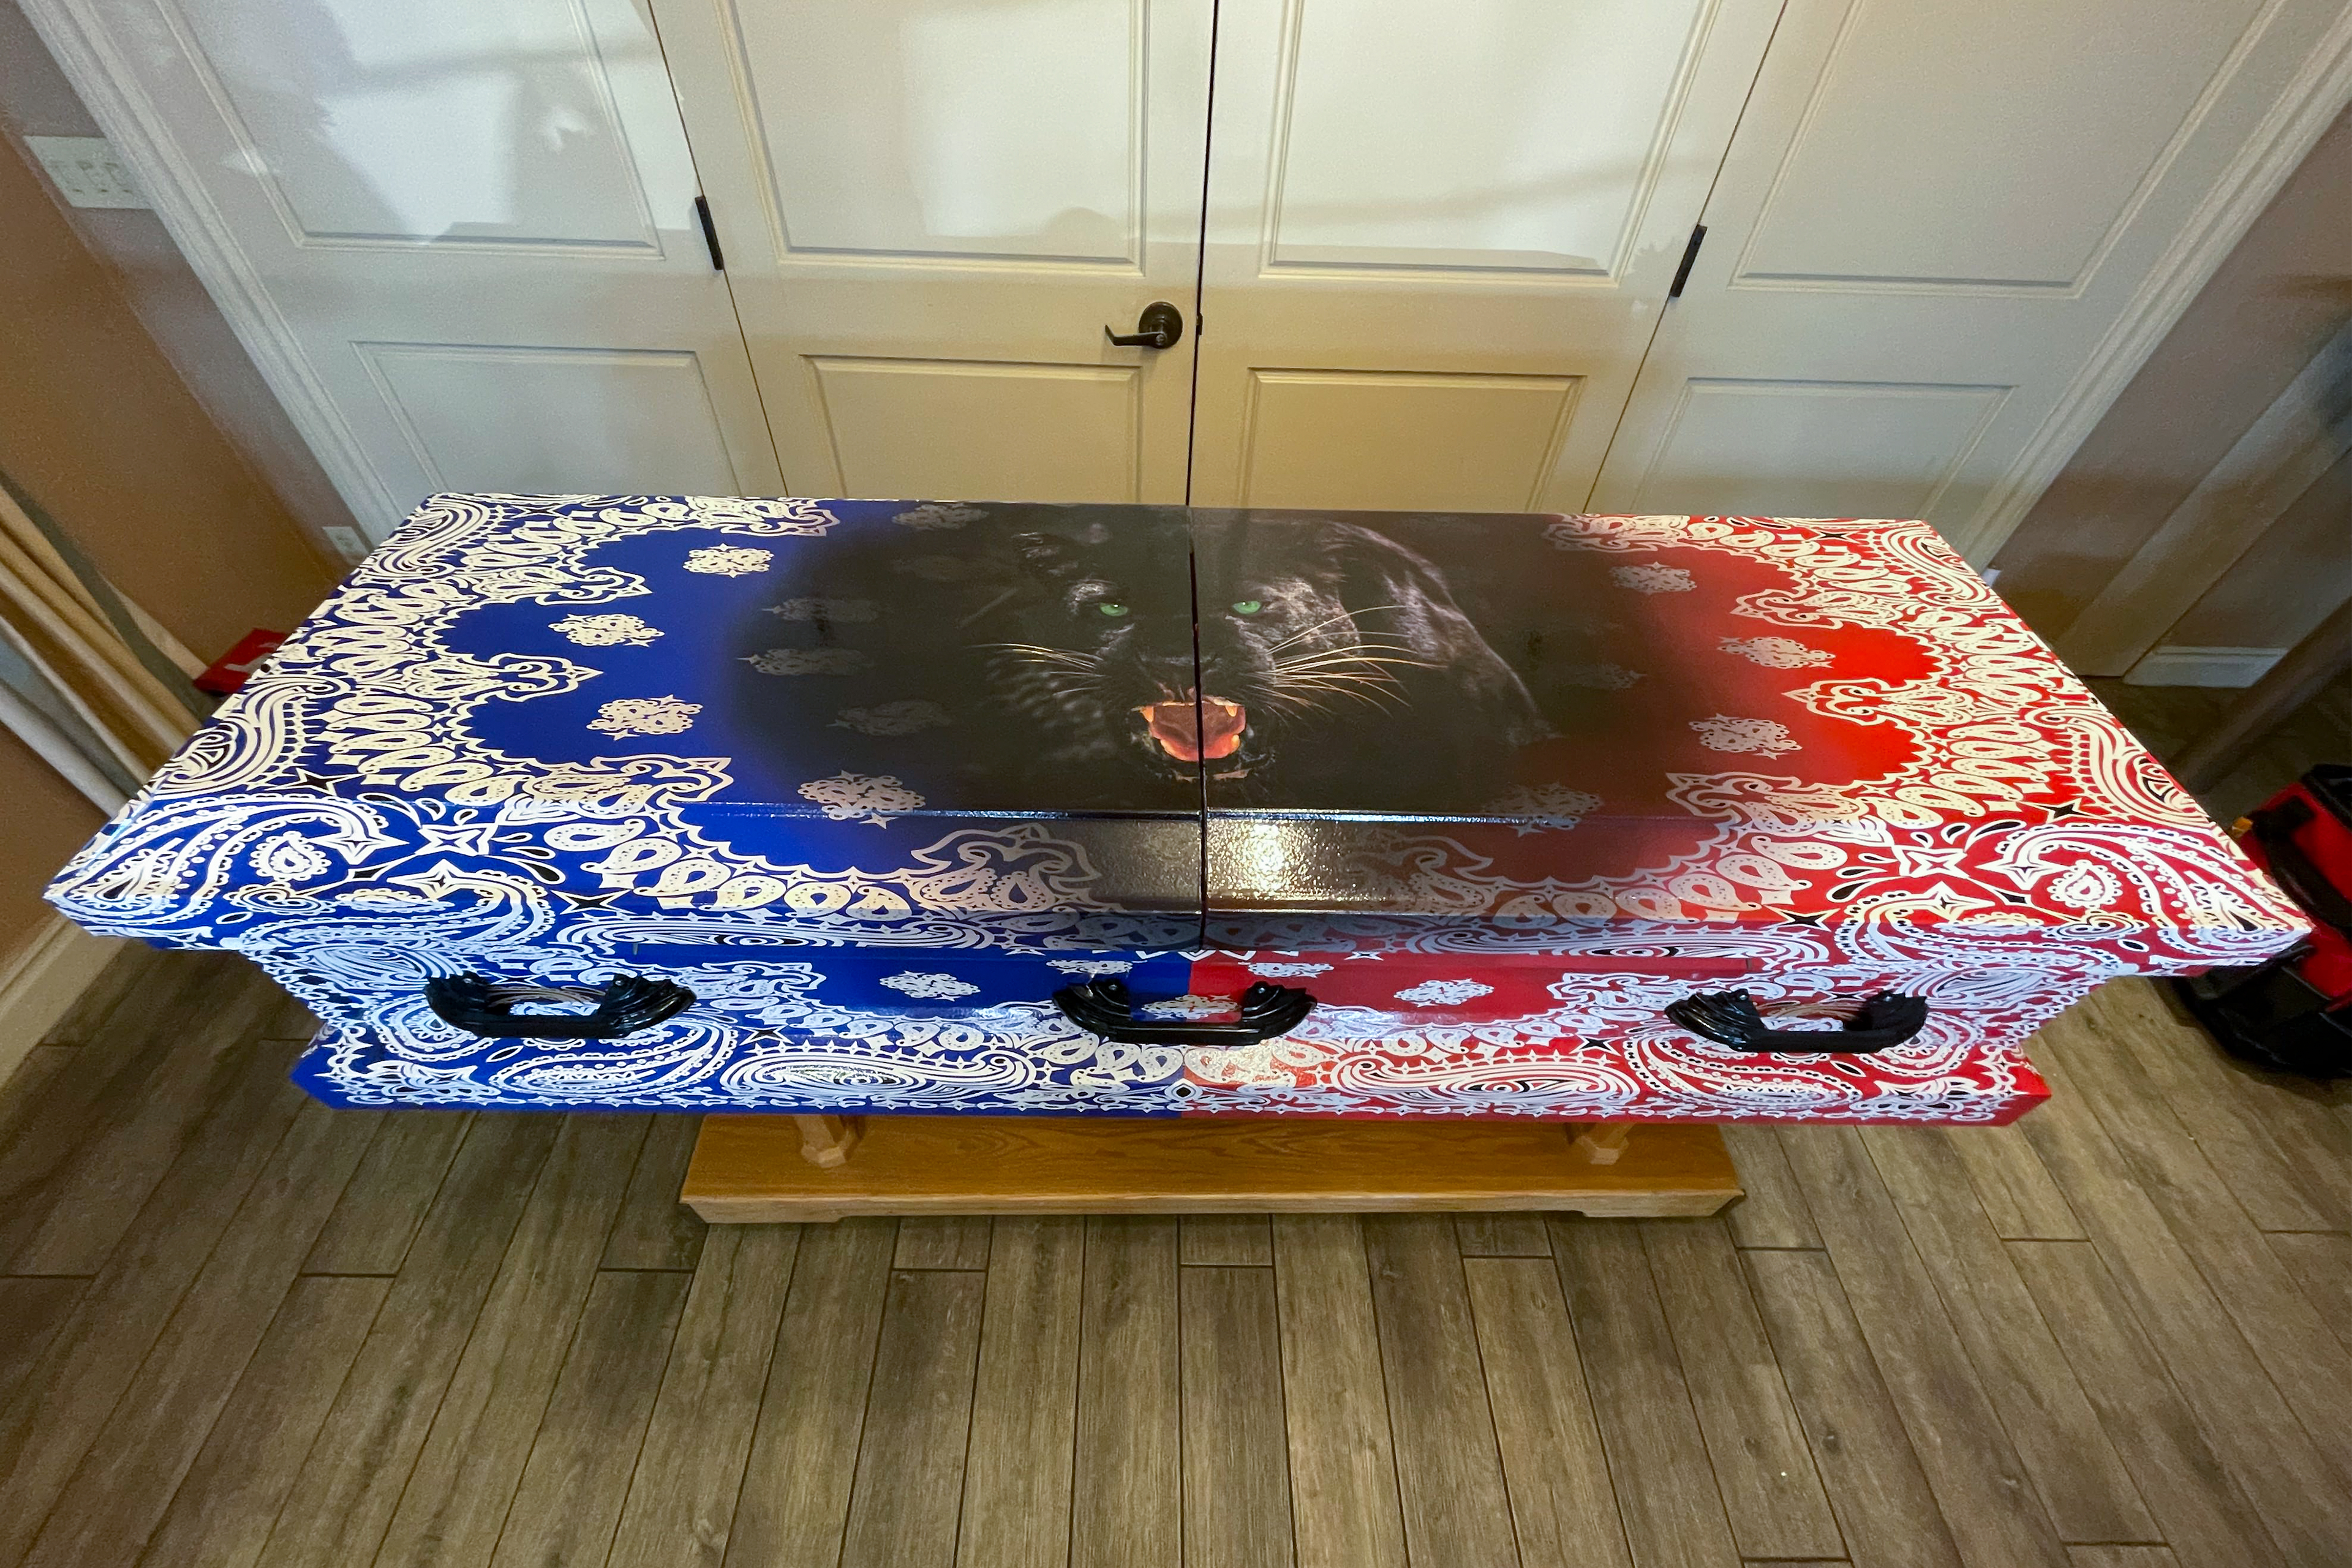 Jermaine Carter's casket was designed by Victoria Lanier to include an image of a black panther surrounded by the design of a blue bandana on its left side and a red bandana on the right.